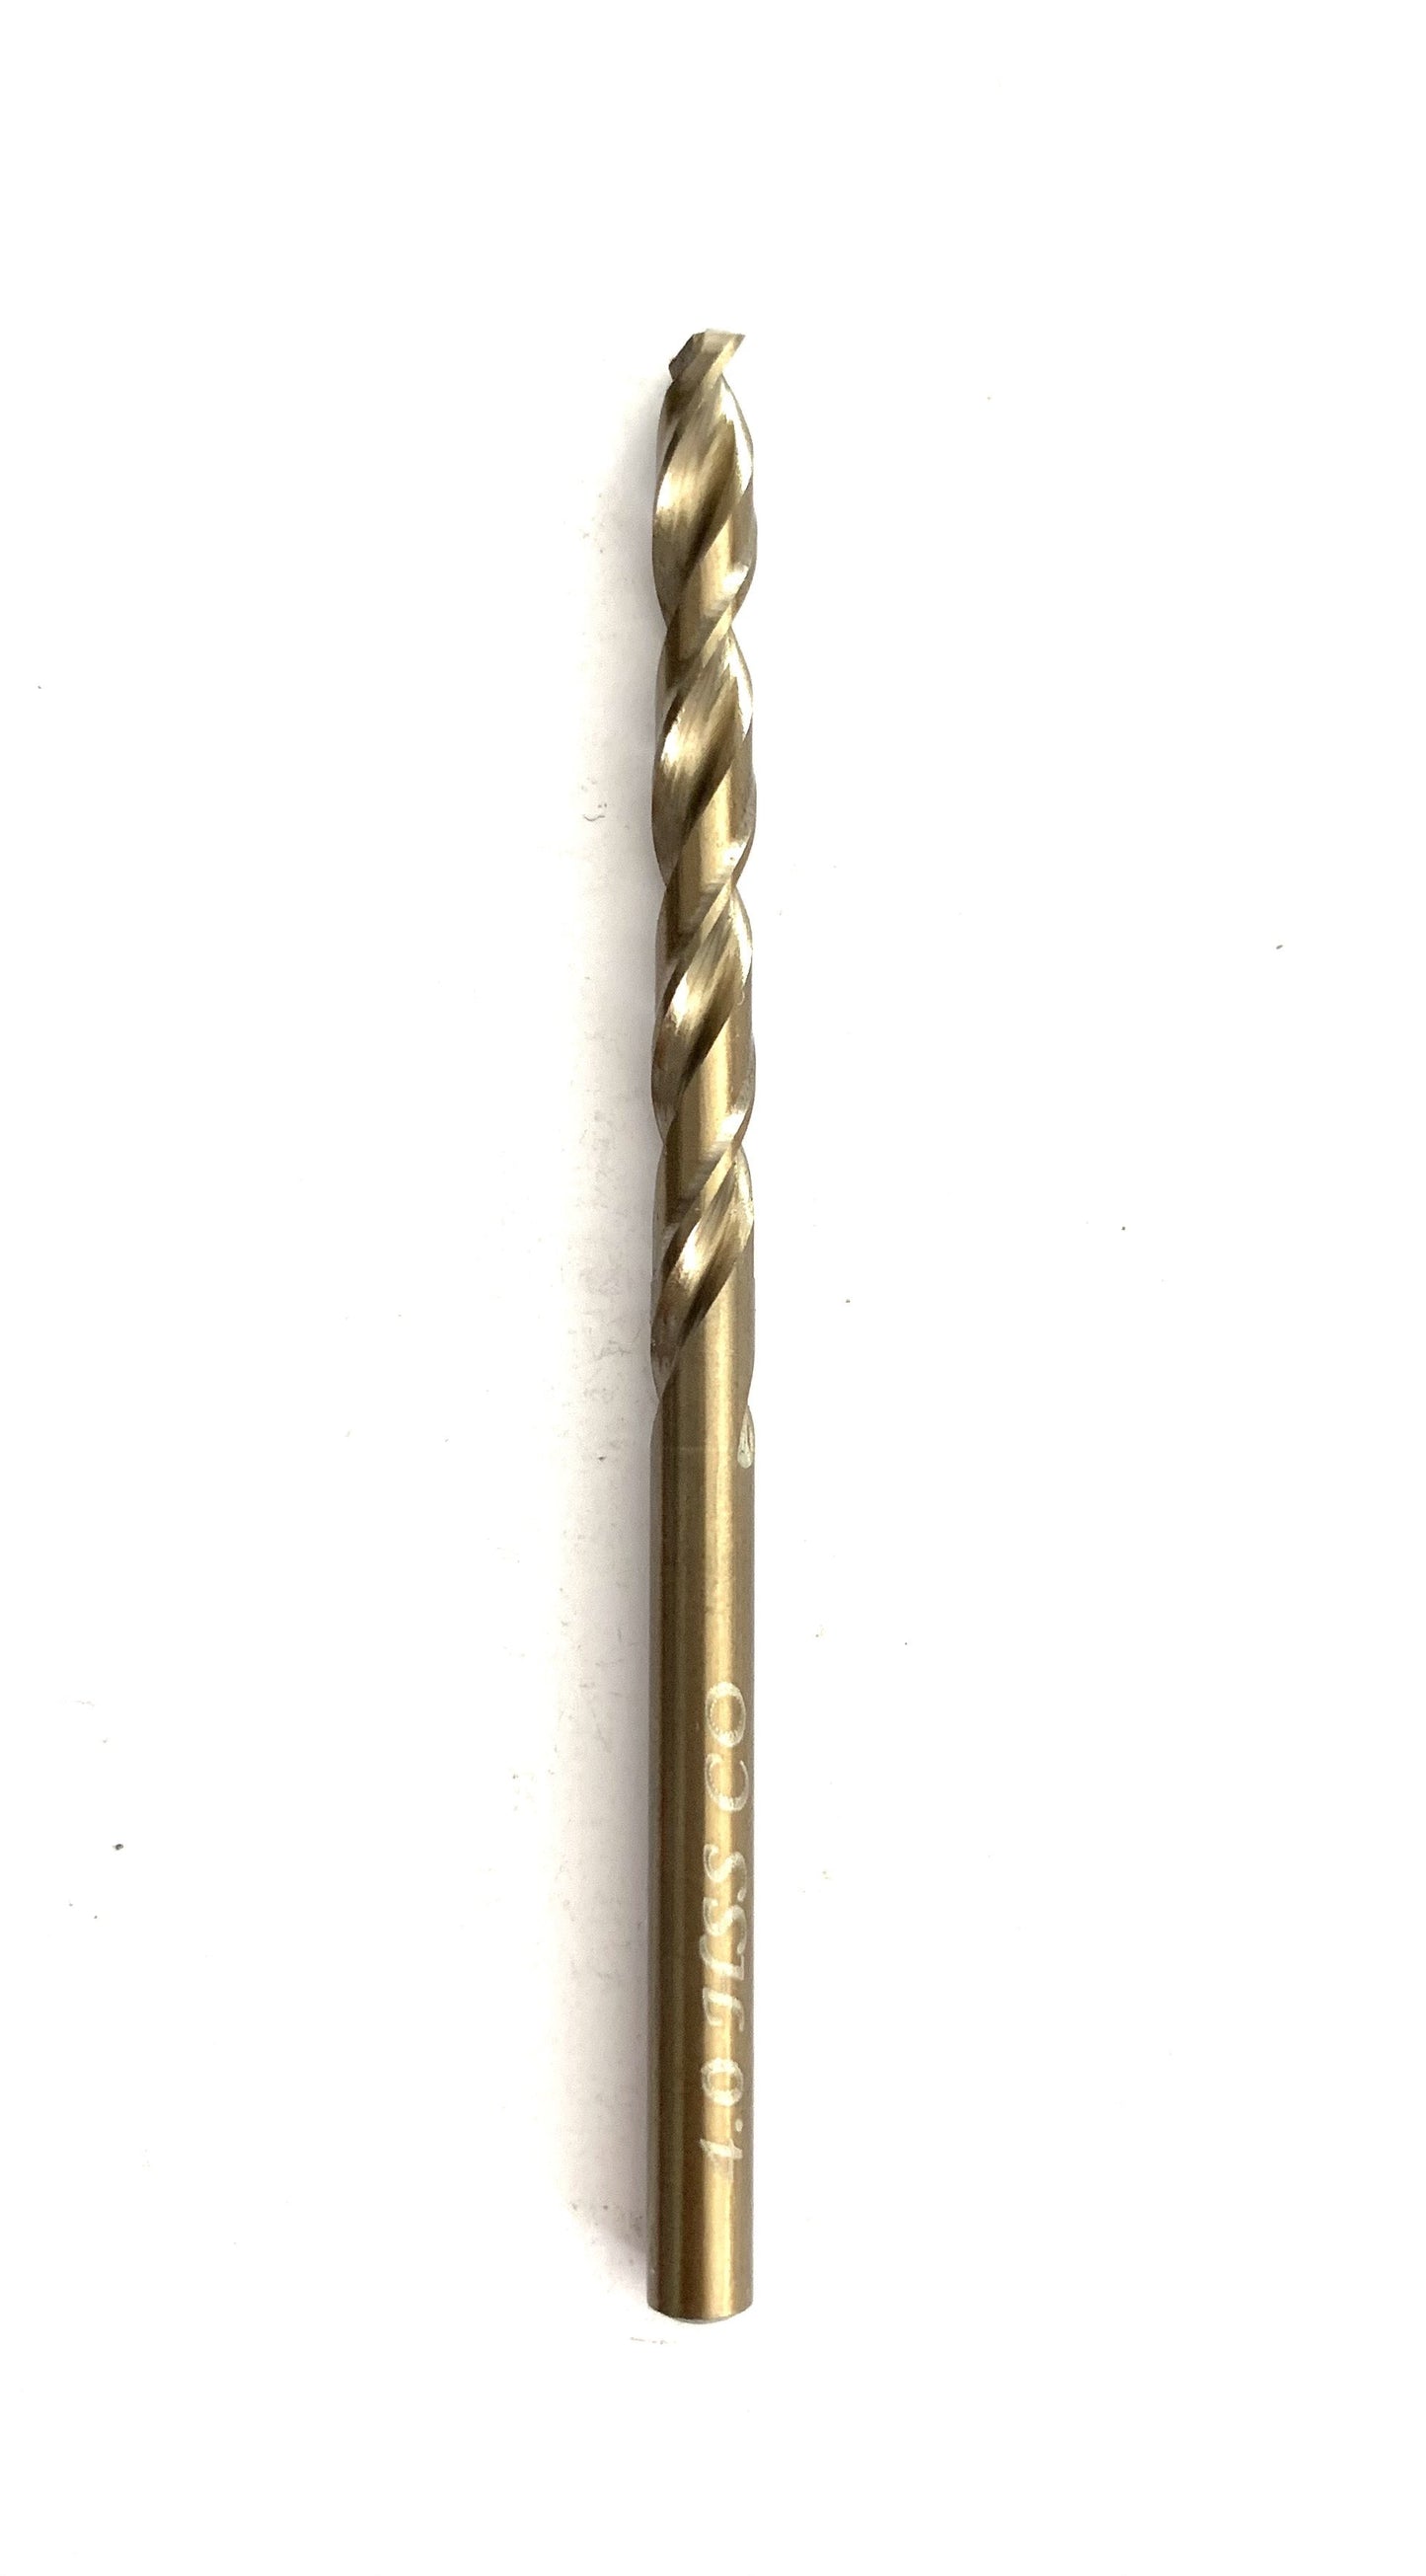 HSS Drill Bit with option of 3.5, 4, 4.5, 5, and 6mm